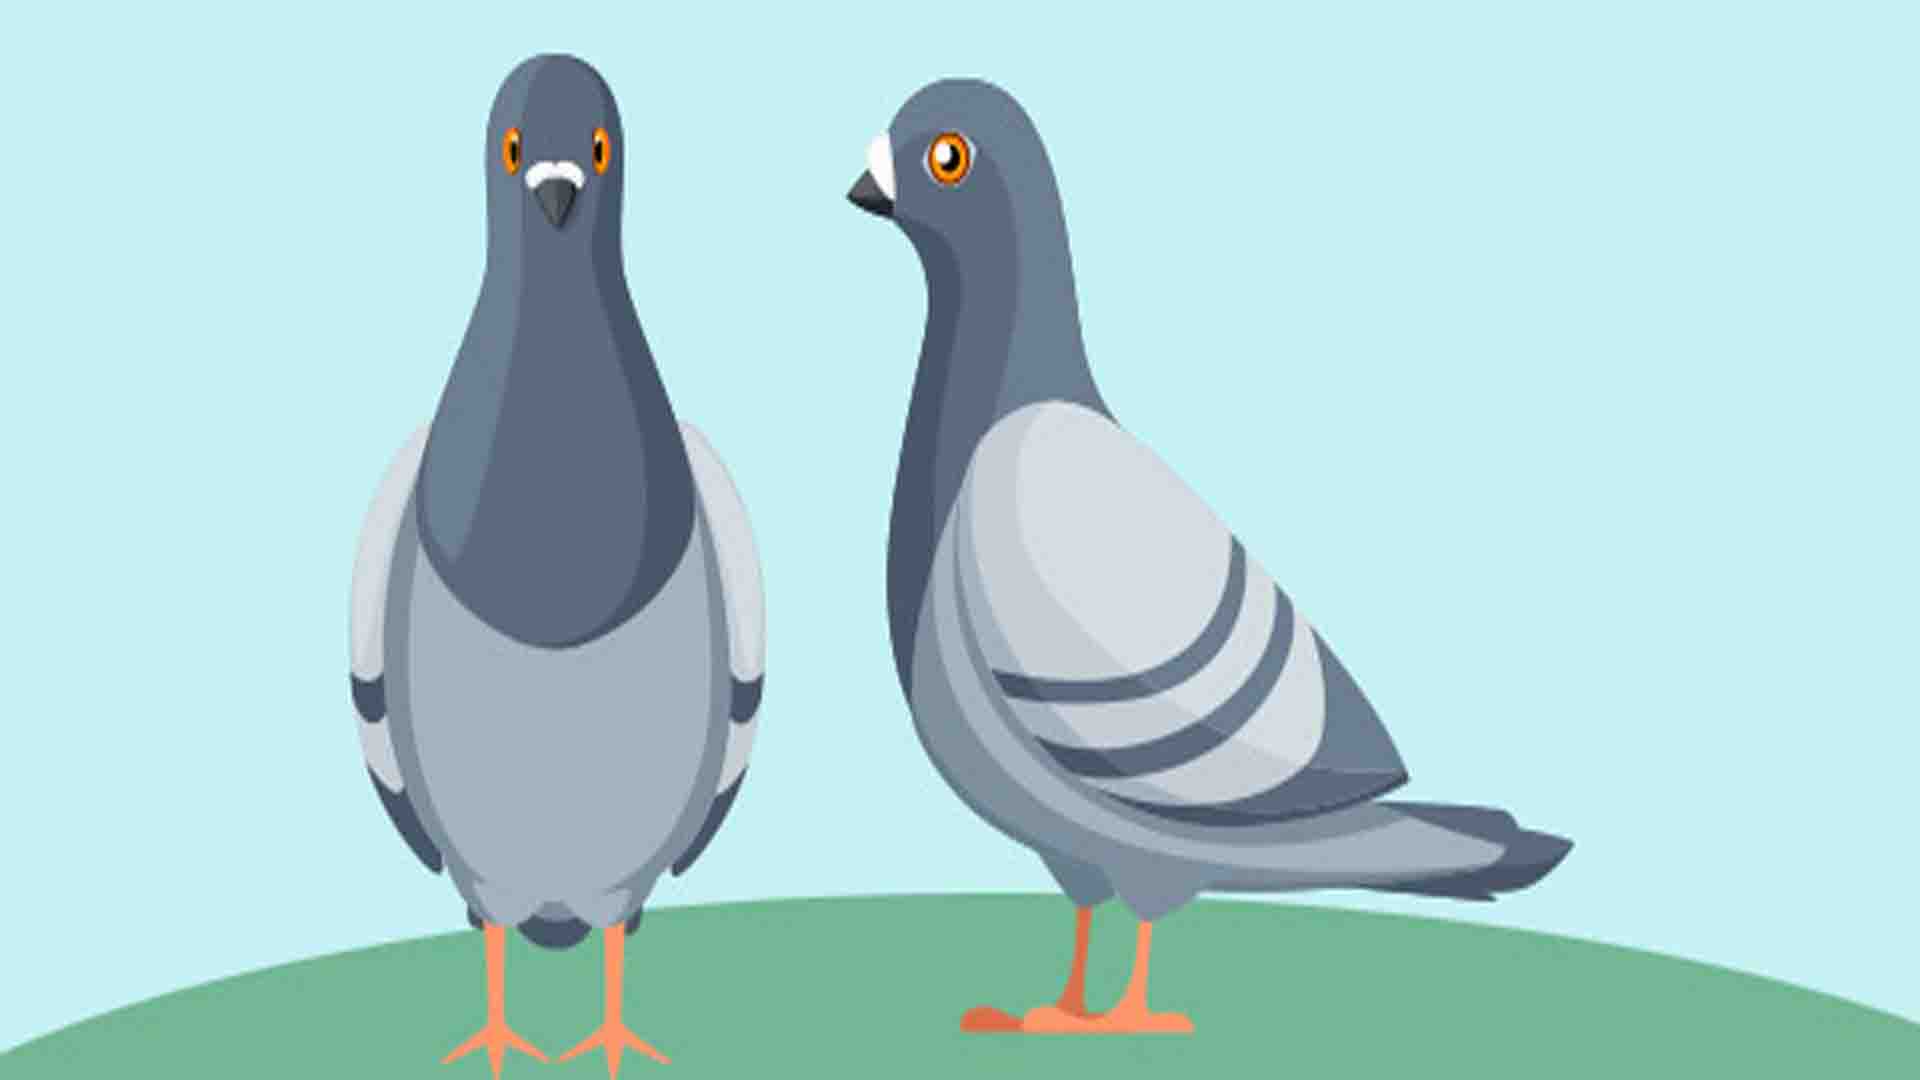 The gift of the doves a long stories for kids | English Stories for Kids